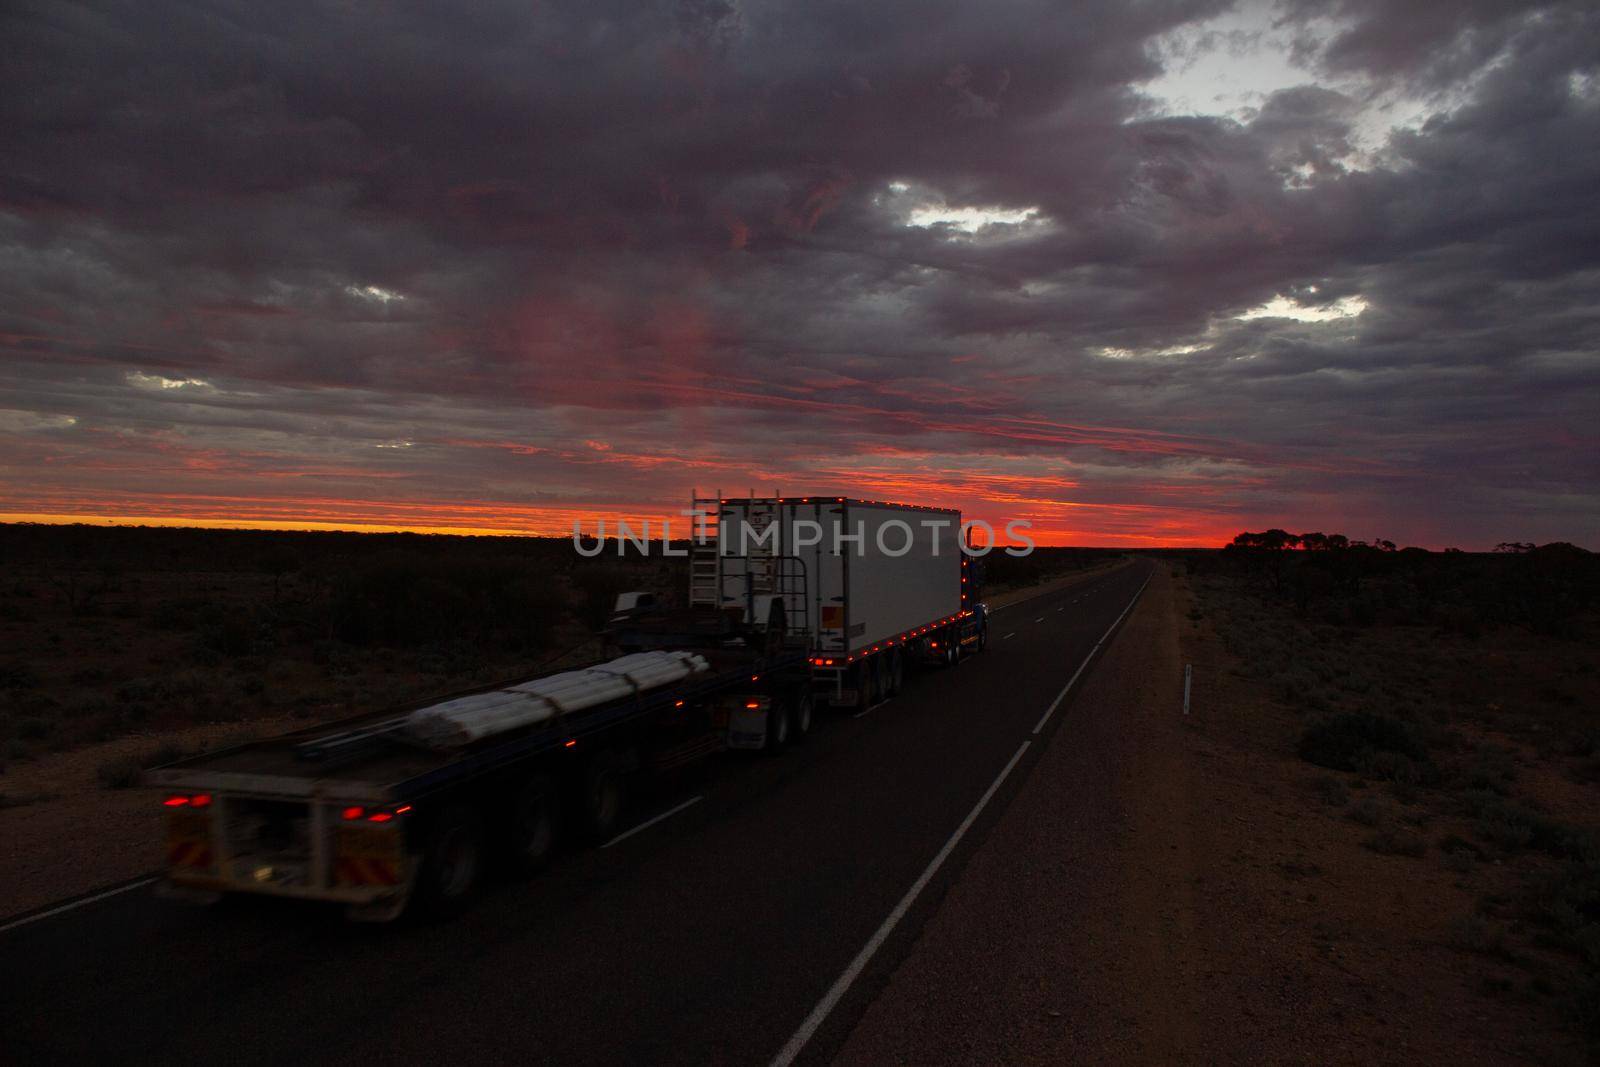 NORTHERN TERRITORY, AUSTRALIA - APRIL 12, 2010: Roadtrains in desert in Northern Territory on April 12, 2010, Australia. A roadtrain use in remote areas of Australia to move freight efficiently.